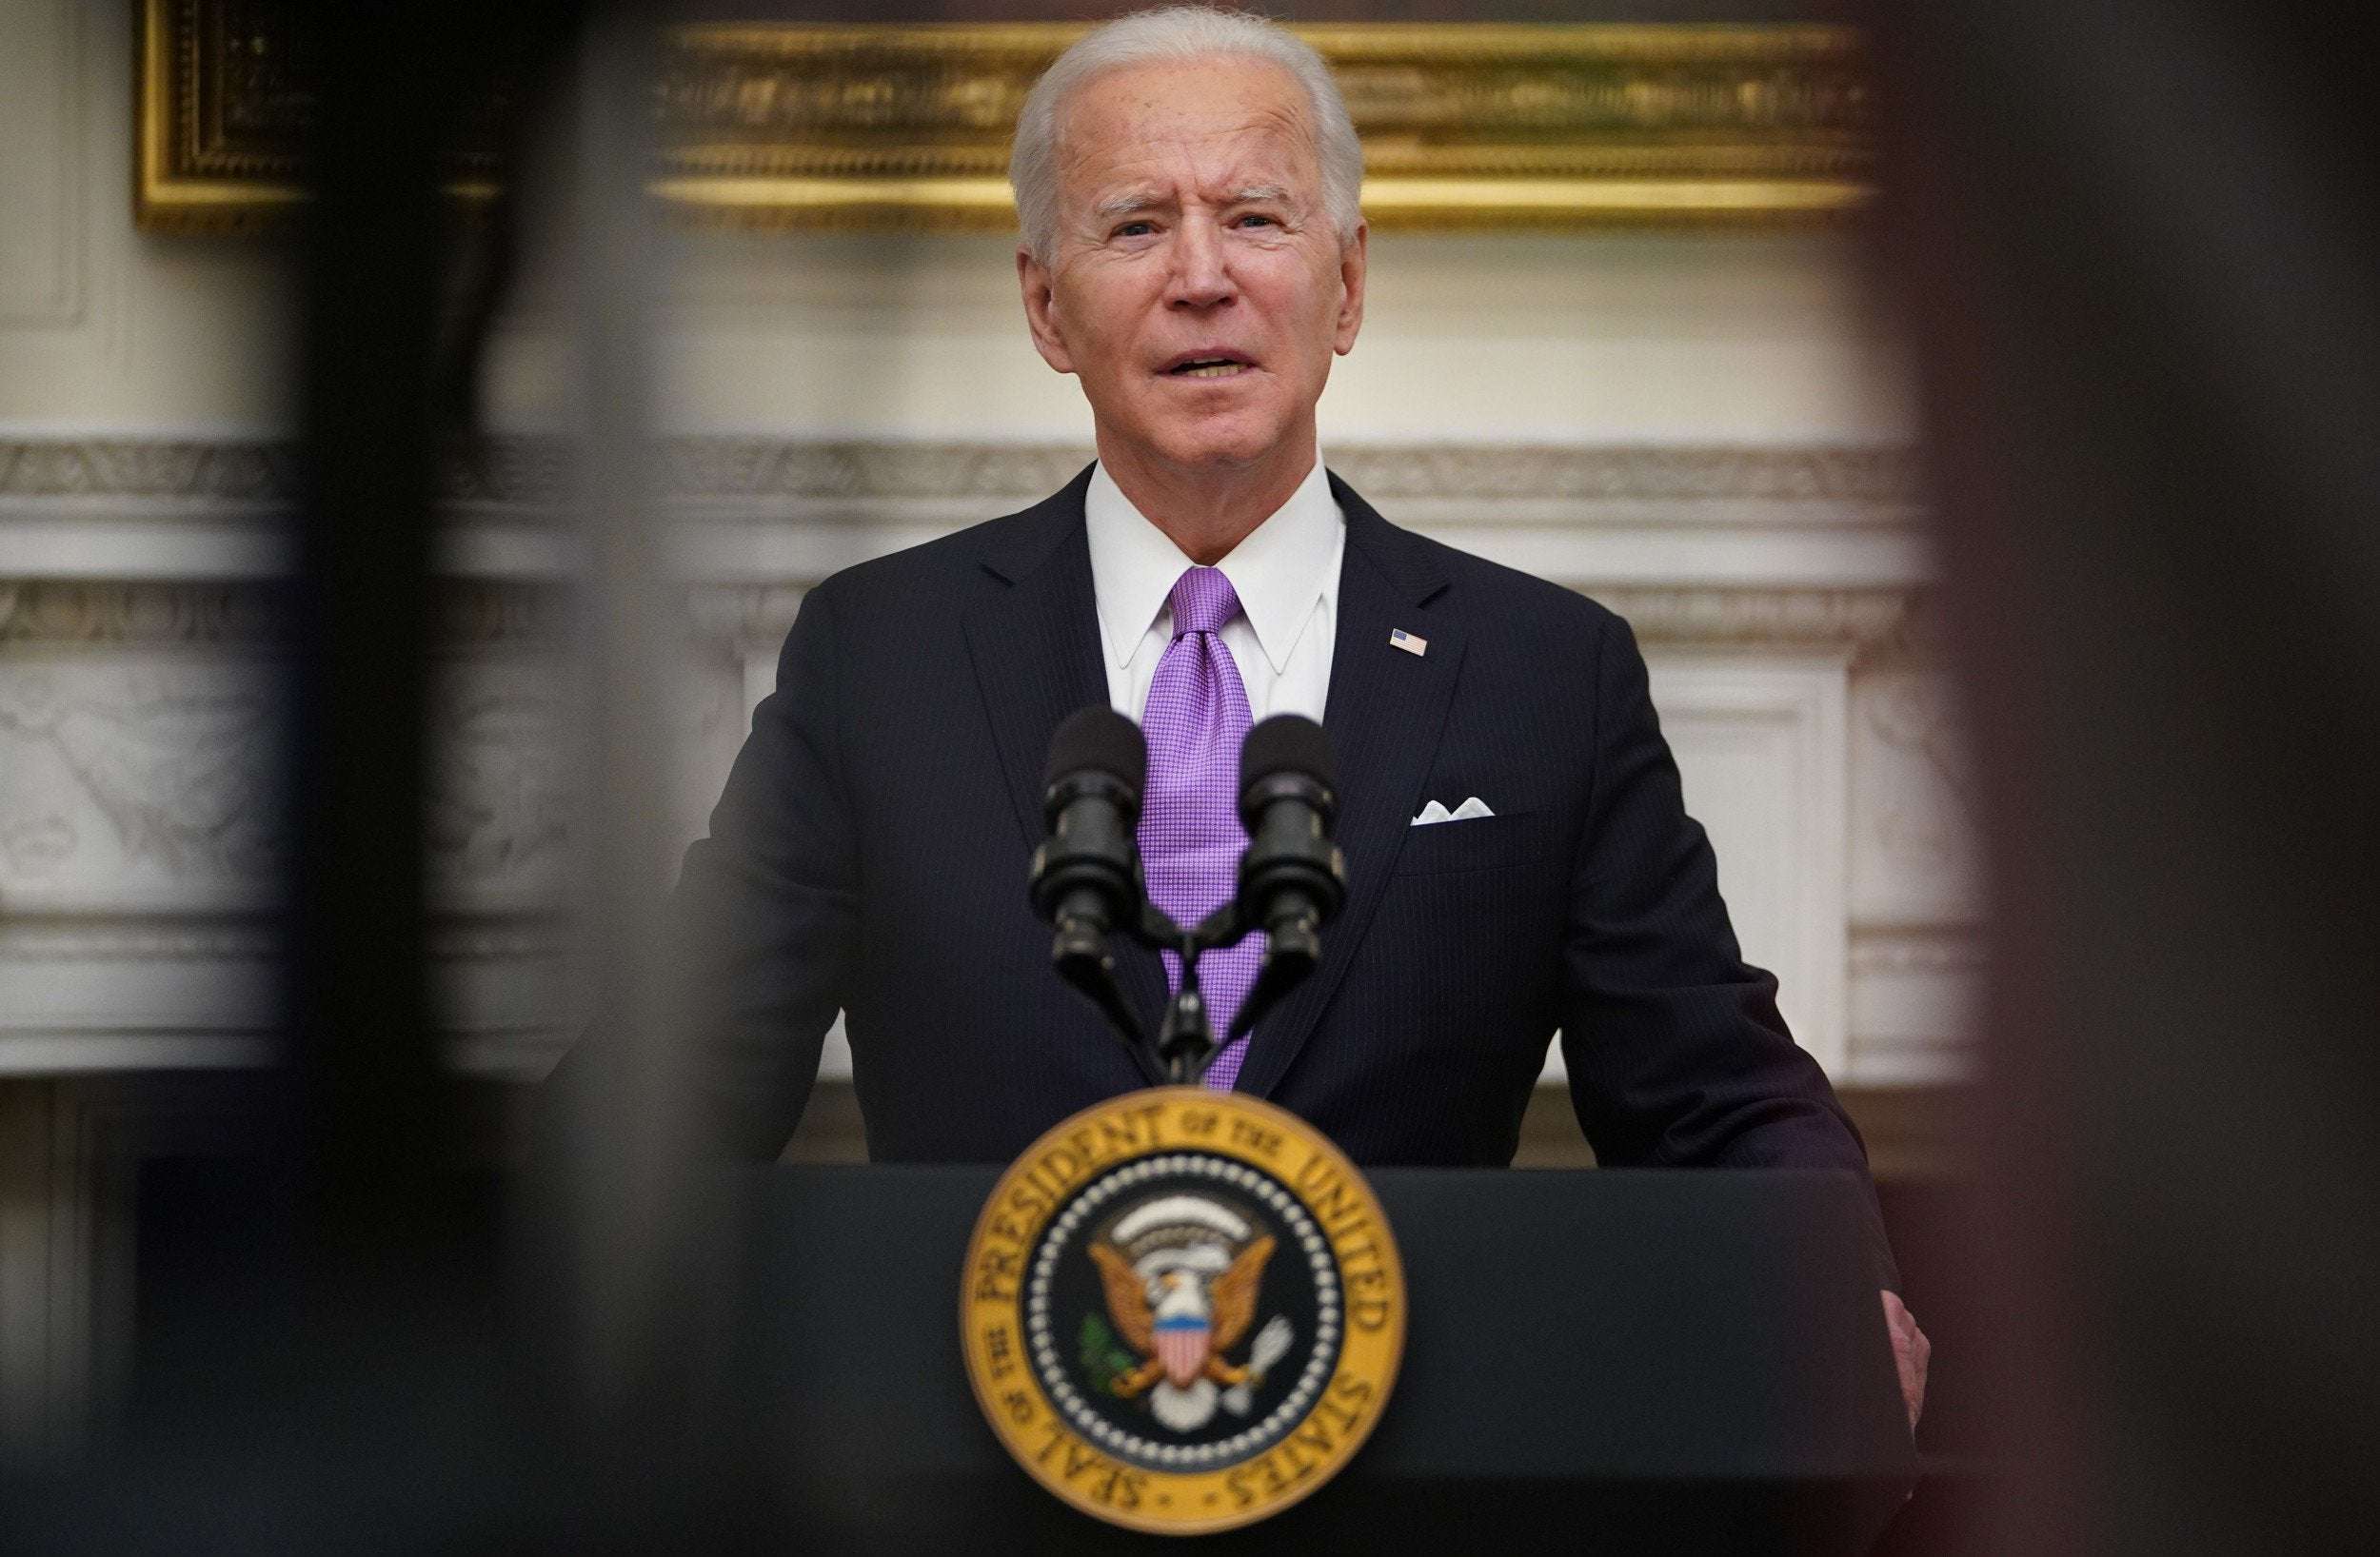 image for 69 Percent of Americans Approve Biden's COVID Response in His First Week as President: Poll